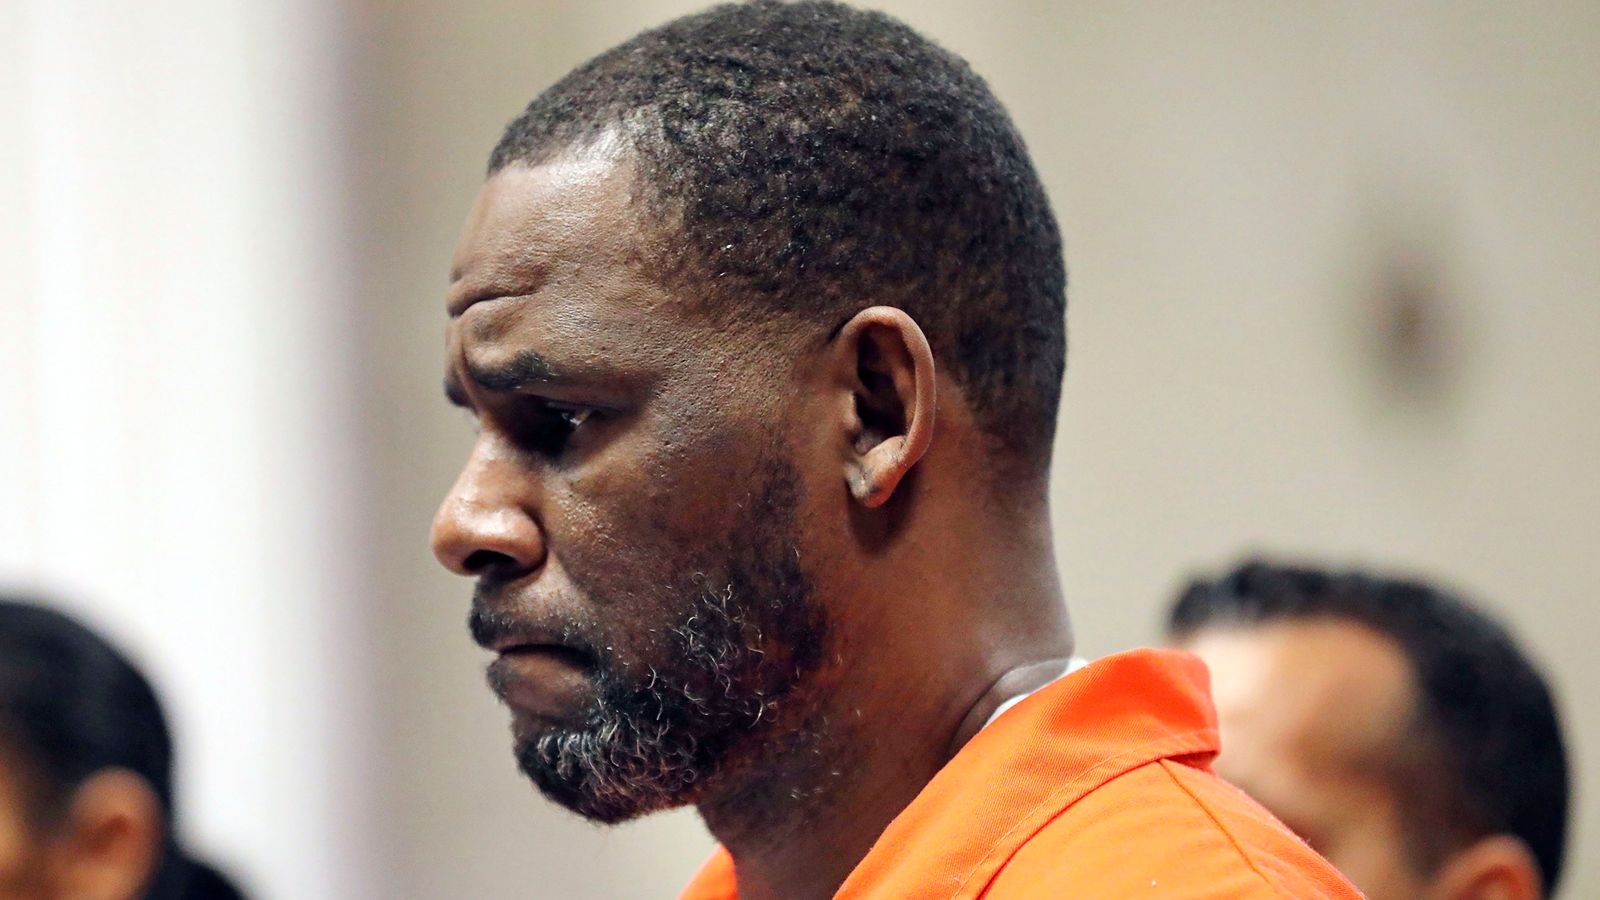 R Kelly convicted of six counts related to child abuse images